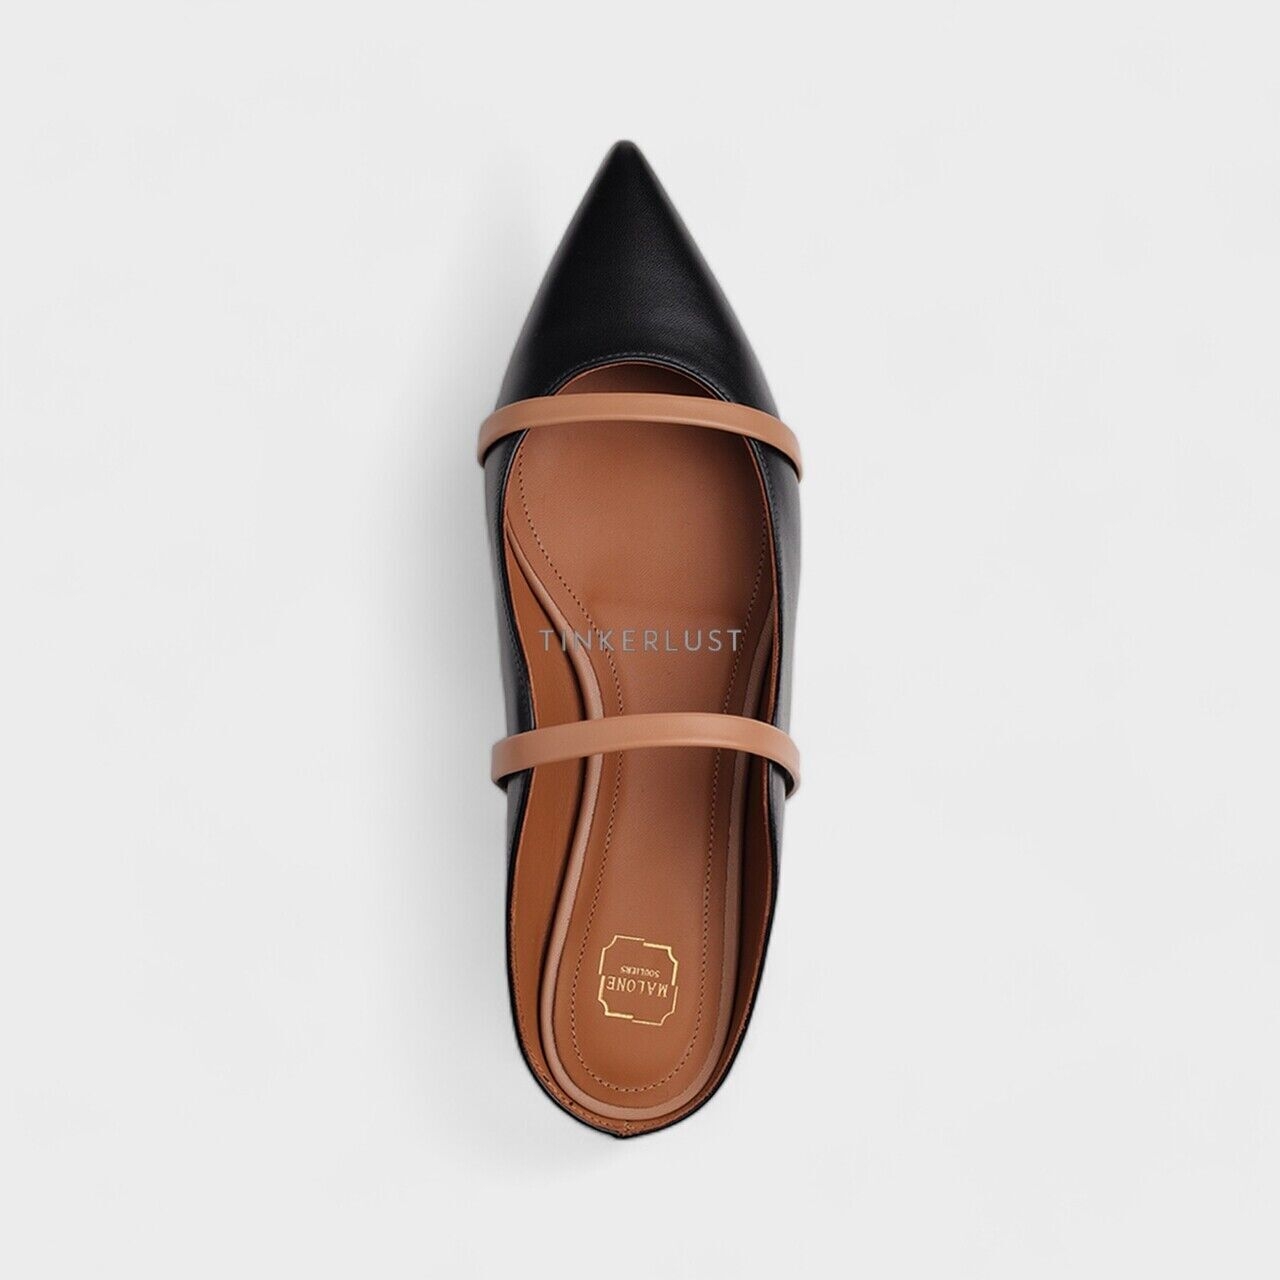 Malone Souliers in Black/Nude Maureen Mules Flats